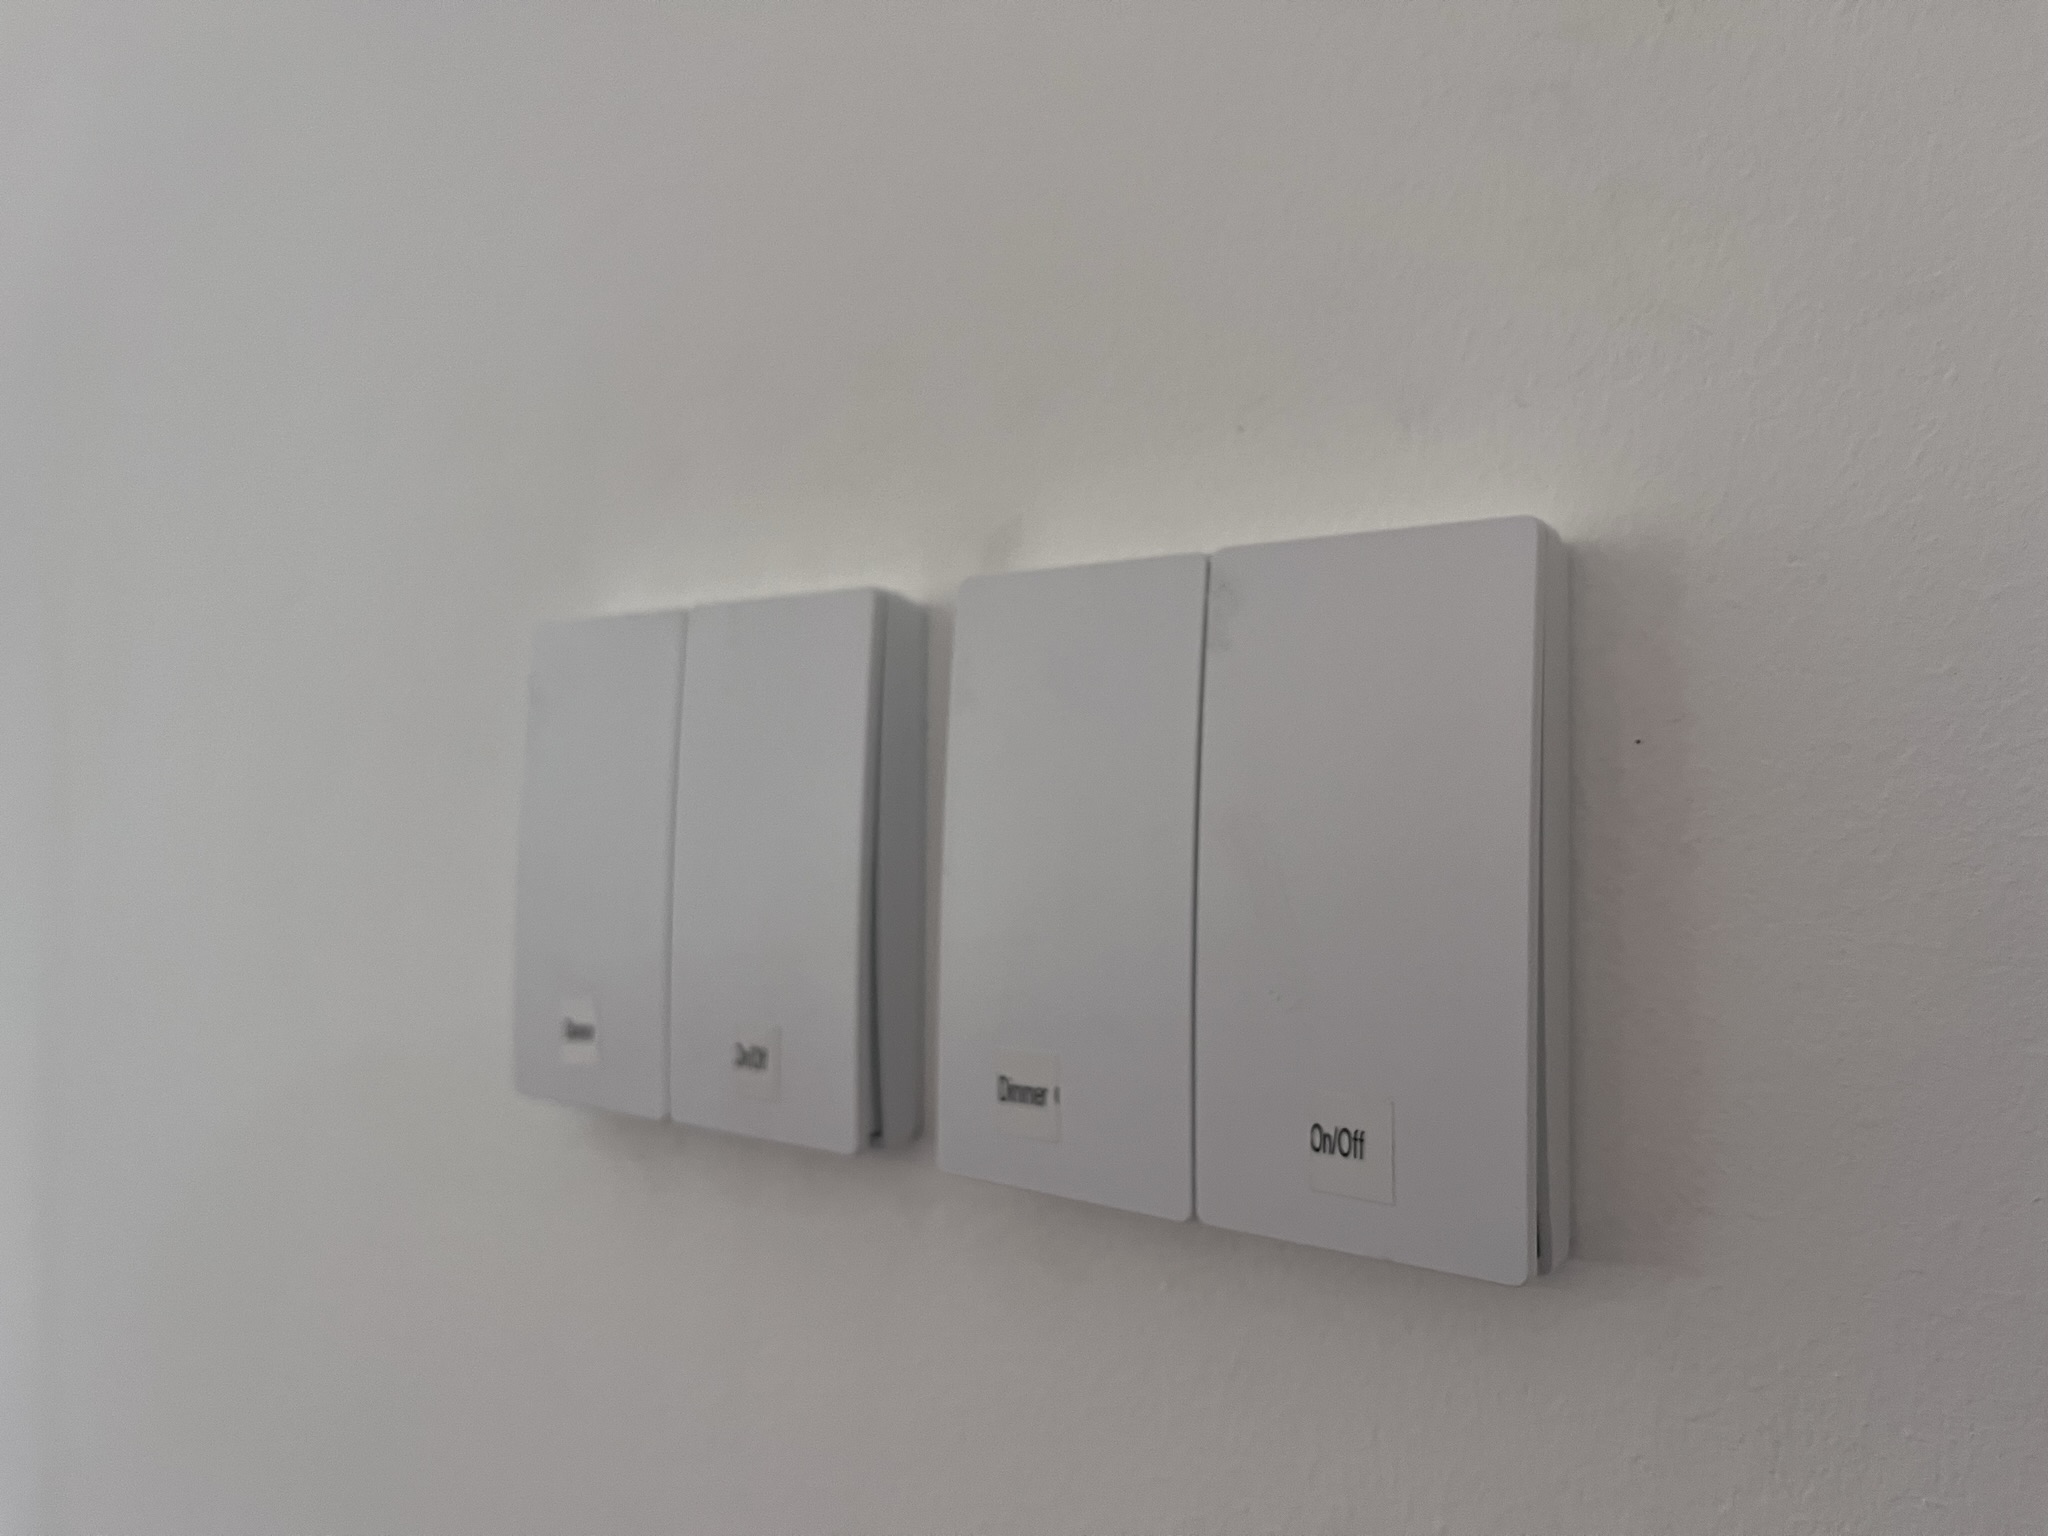 Light switches being used to dim lighting. Switches are stuck on and have no wires running to them. 